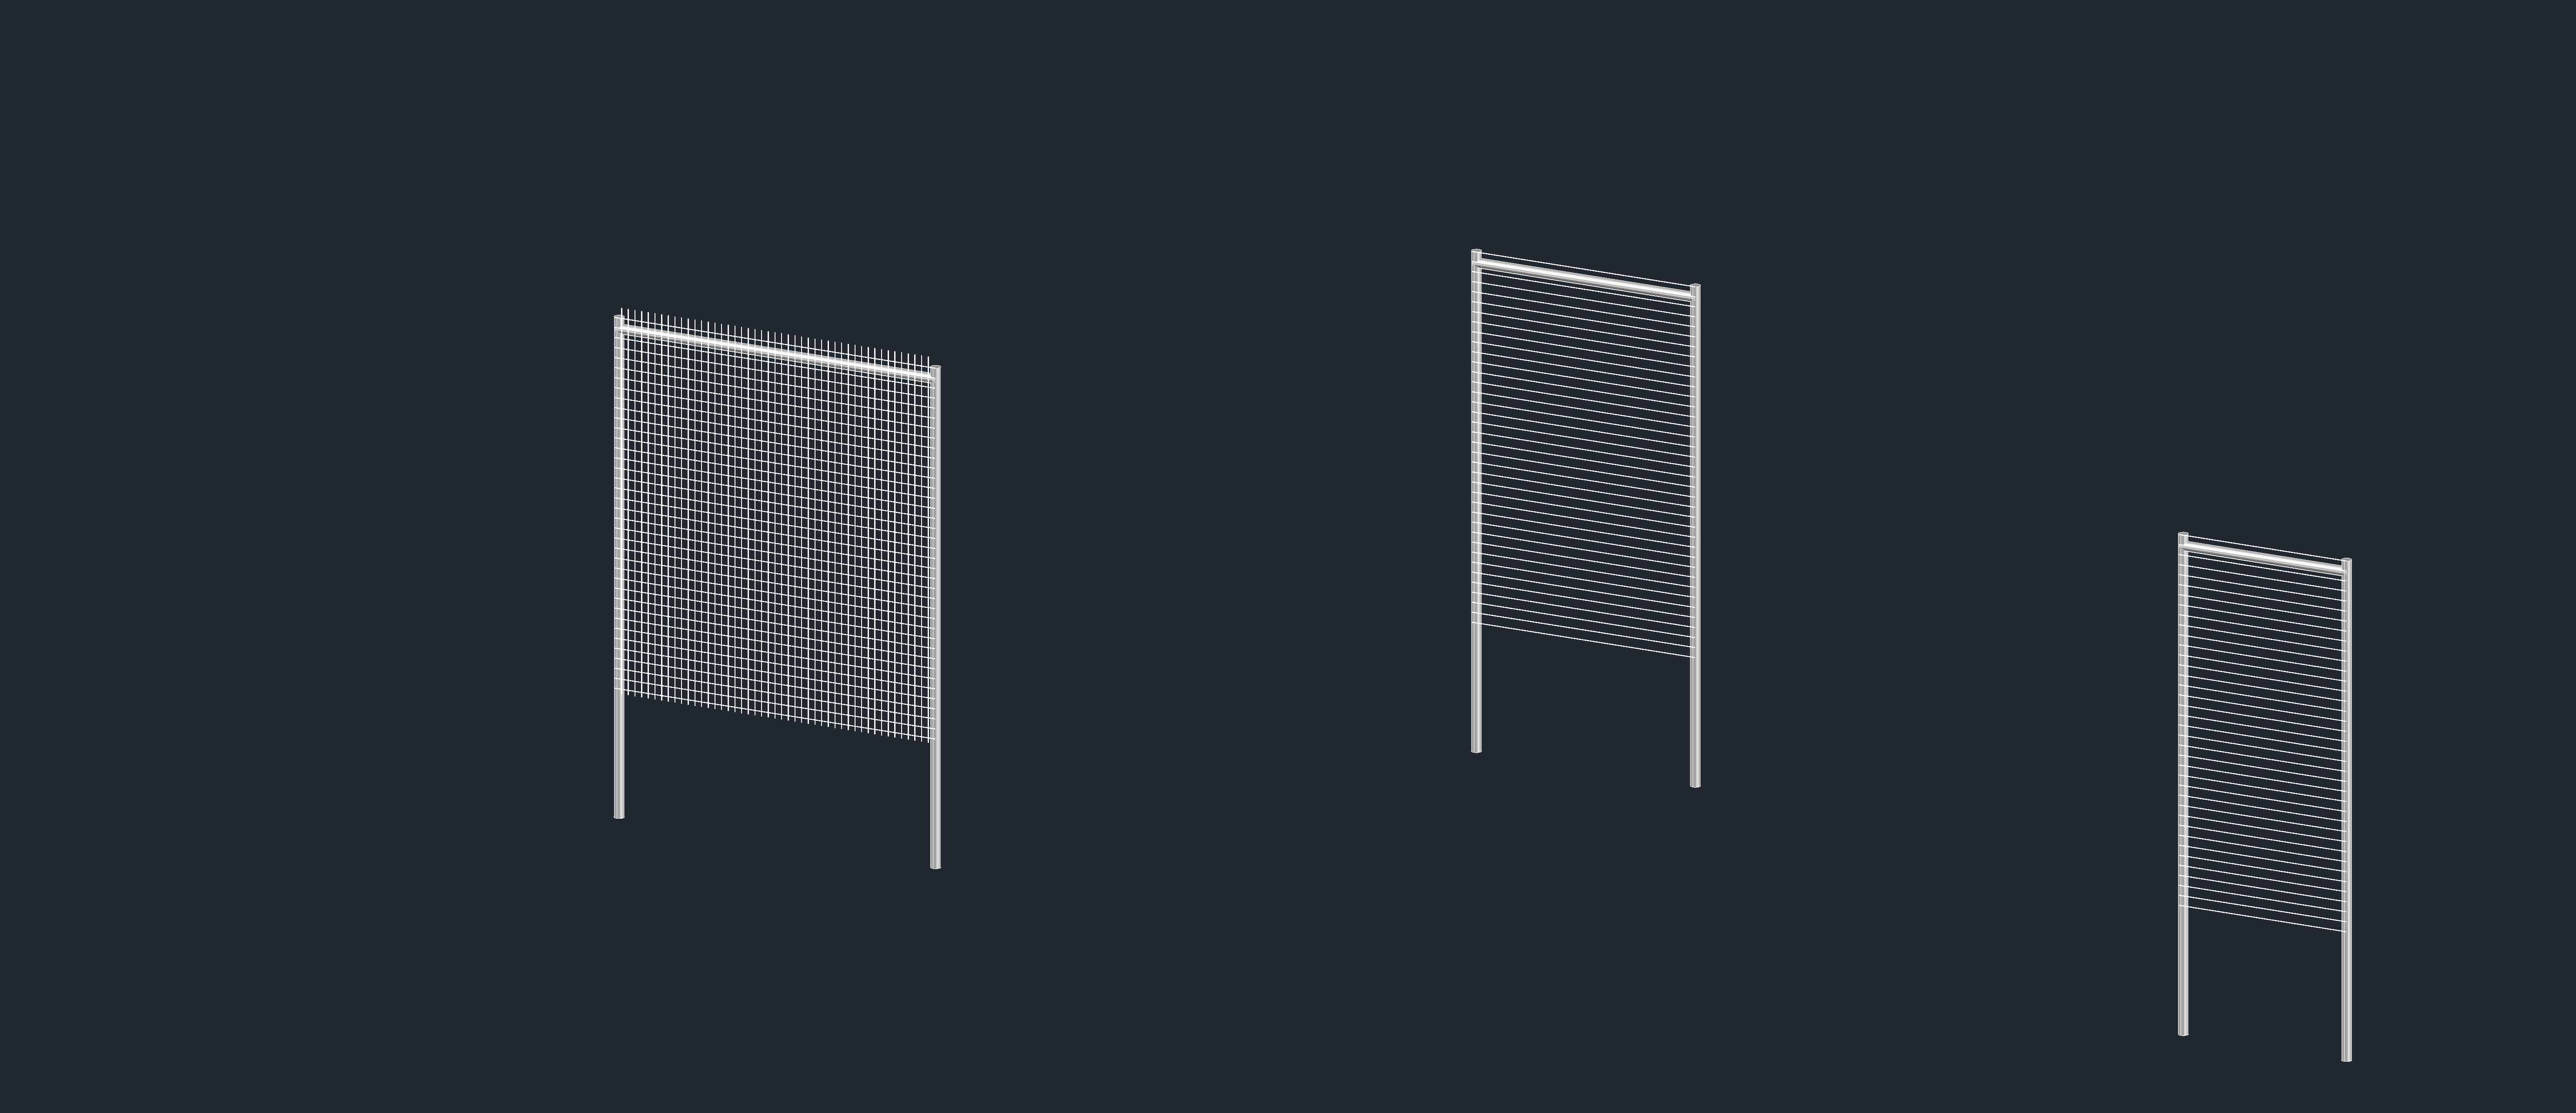 DOWNLOAD 3D_Fence.dwg